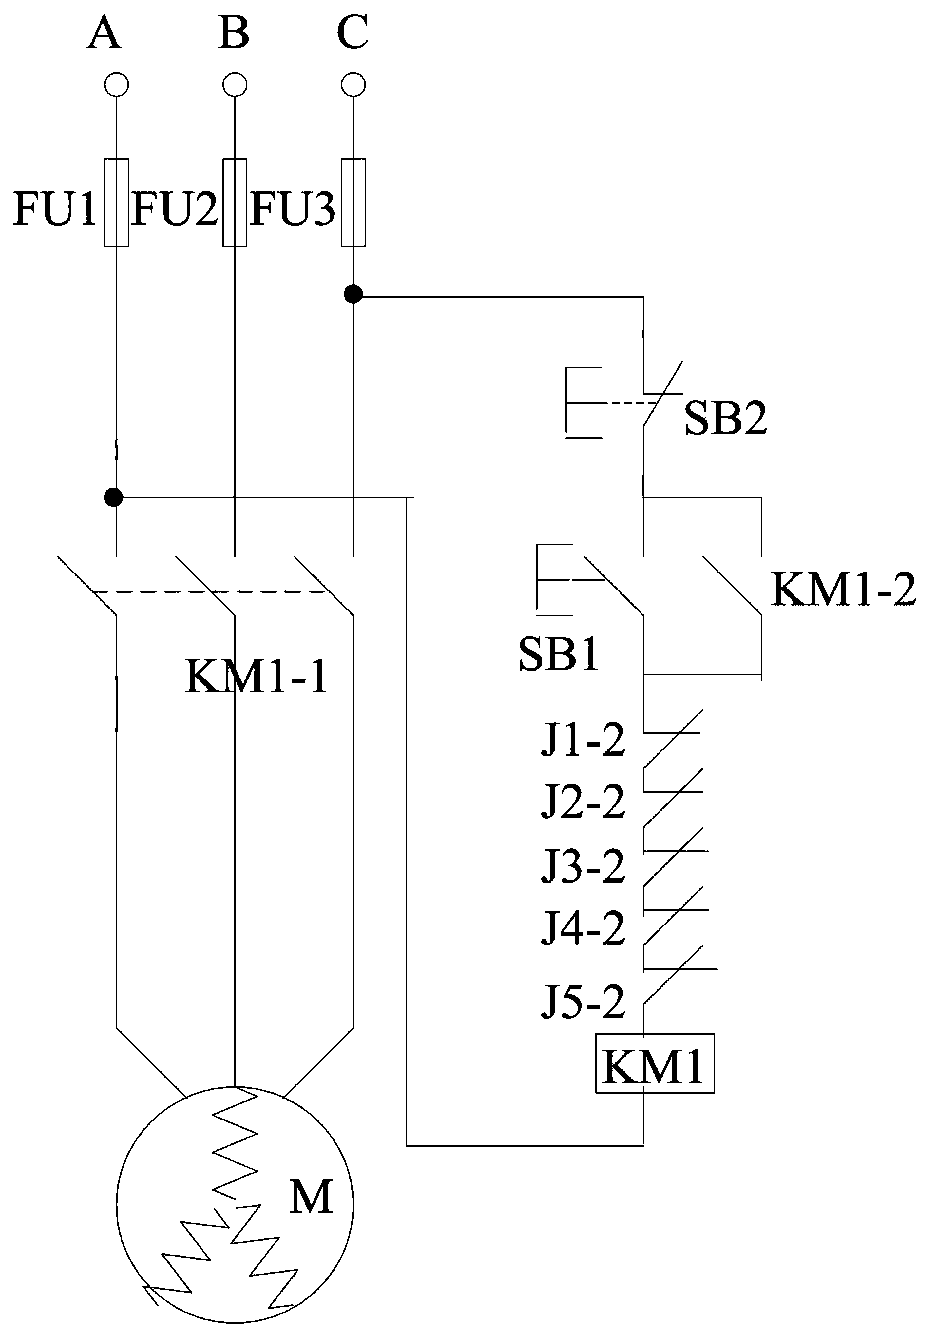 A safety protection circuit for three-phase AC motor